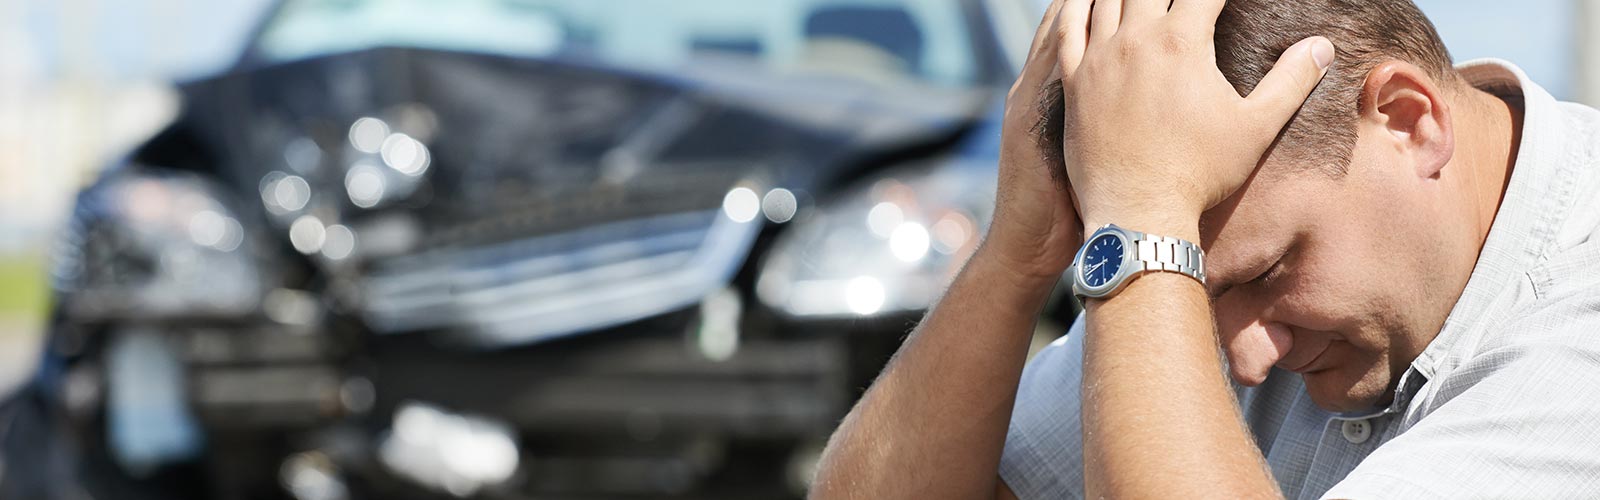 Man Needing an Attorney After a Car Accident